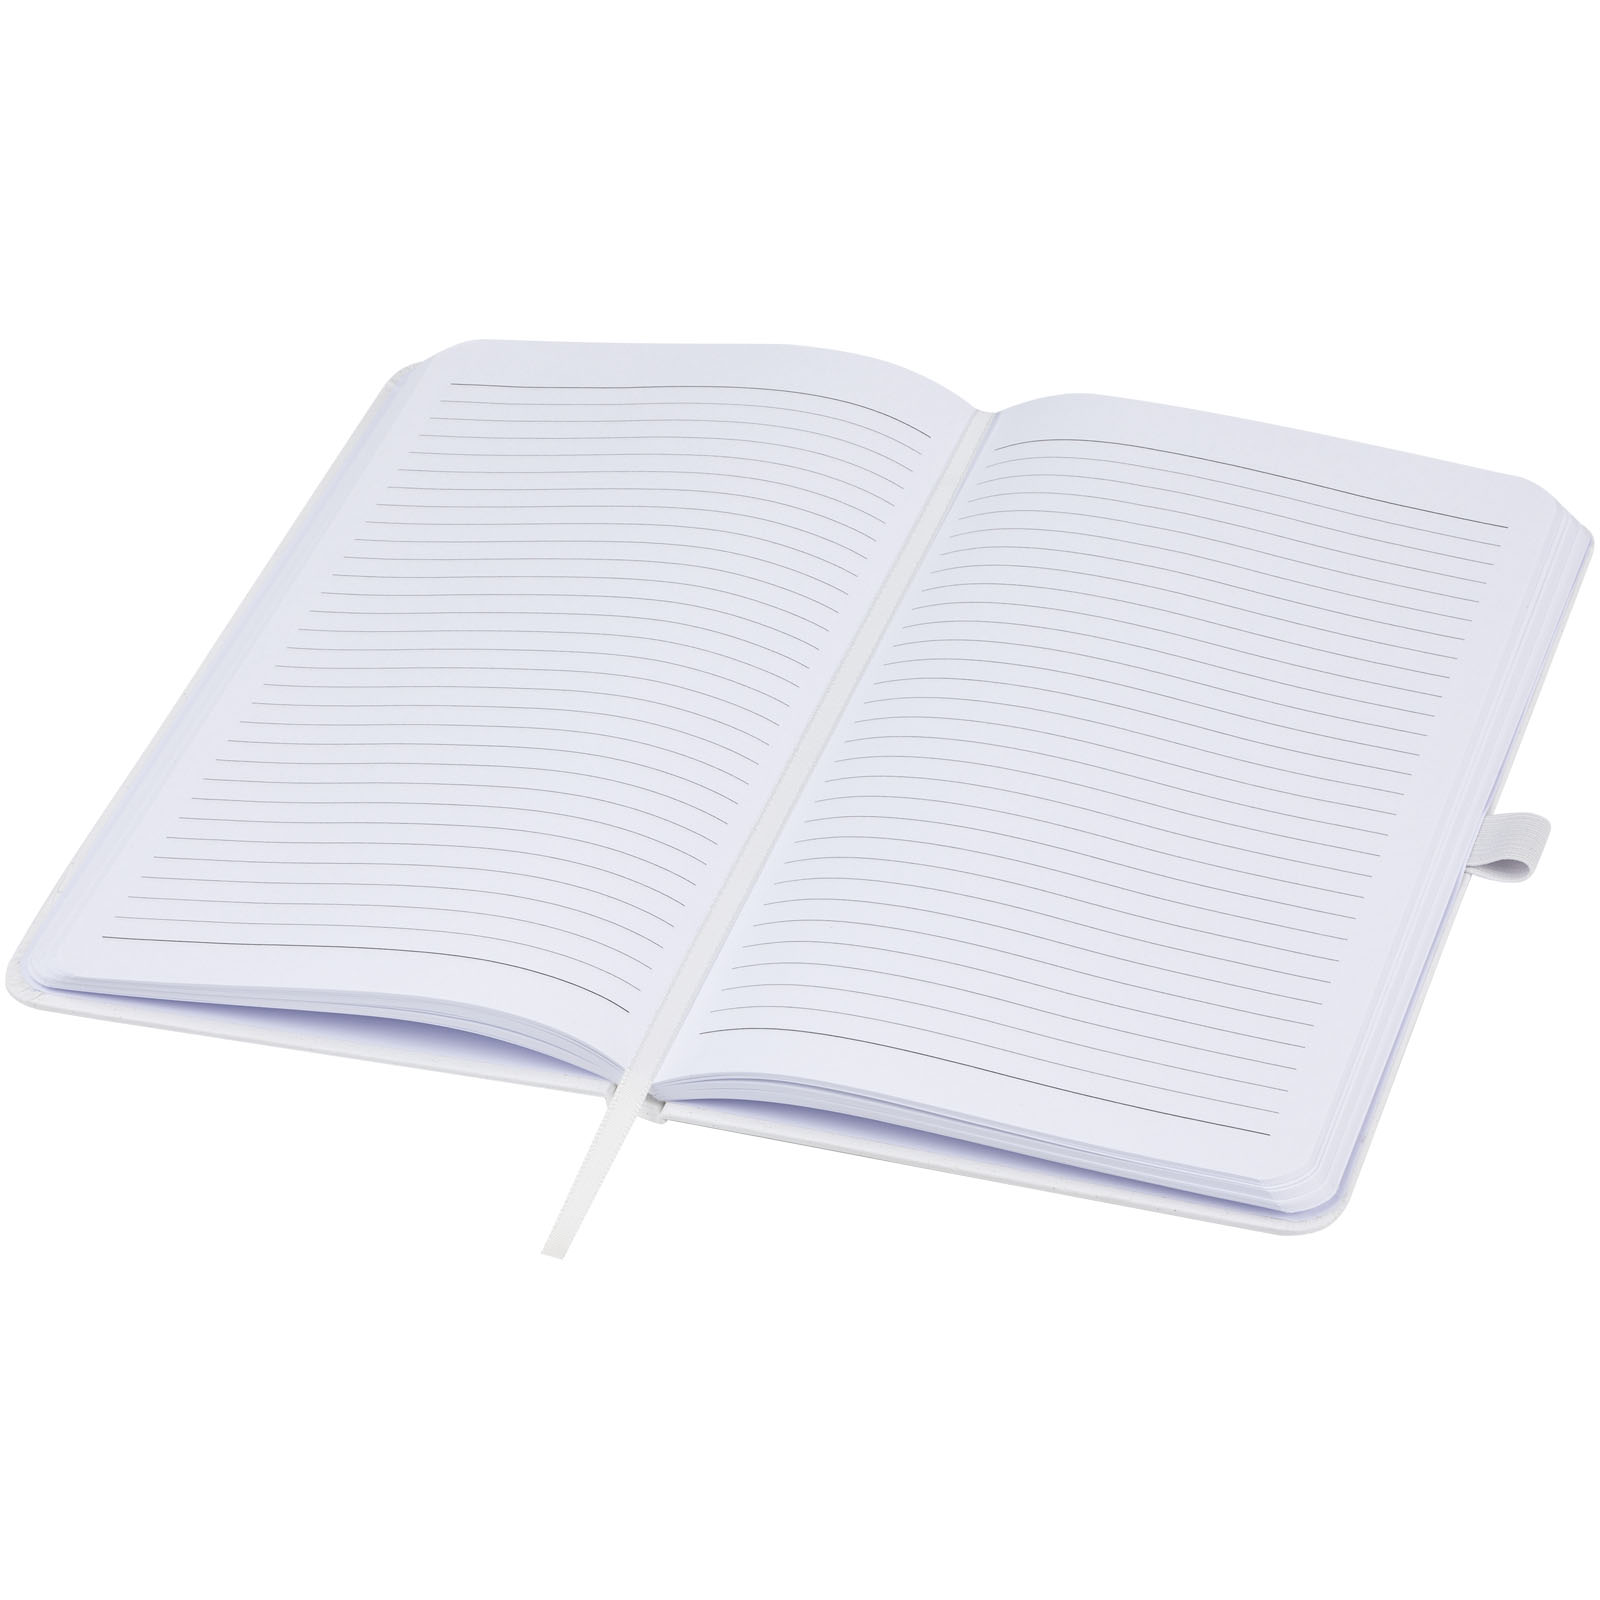 Advertising Hard cover notebooks - Fabianna crush paper hard cover notebook - 3